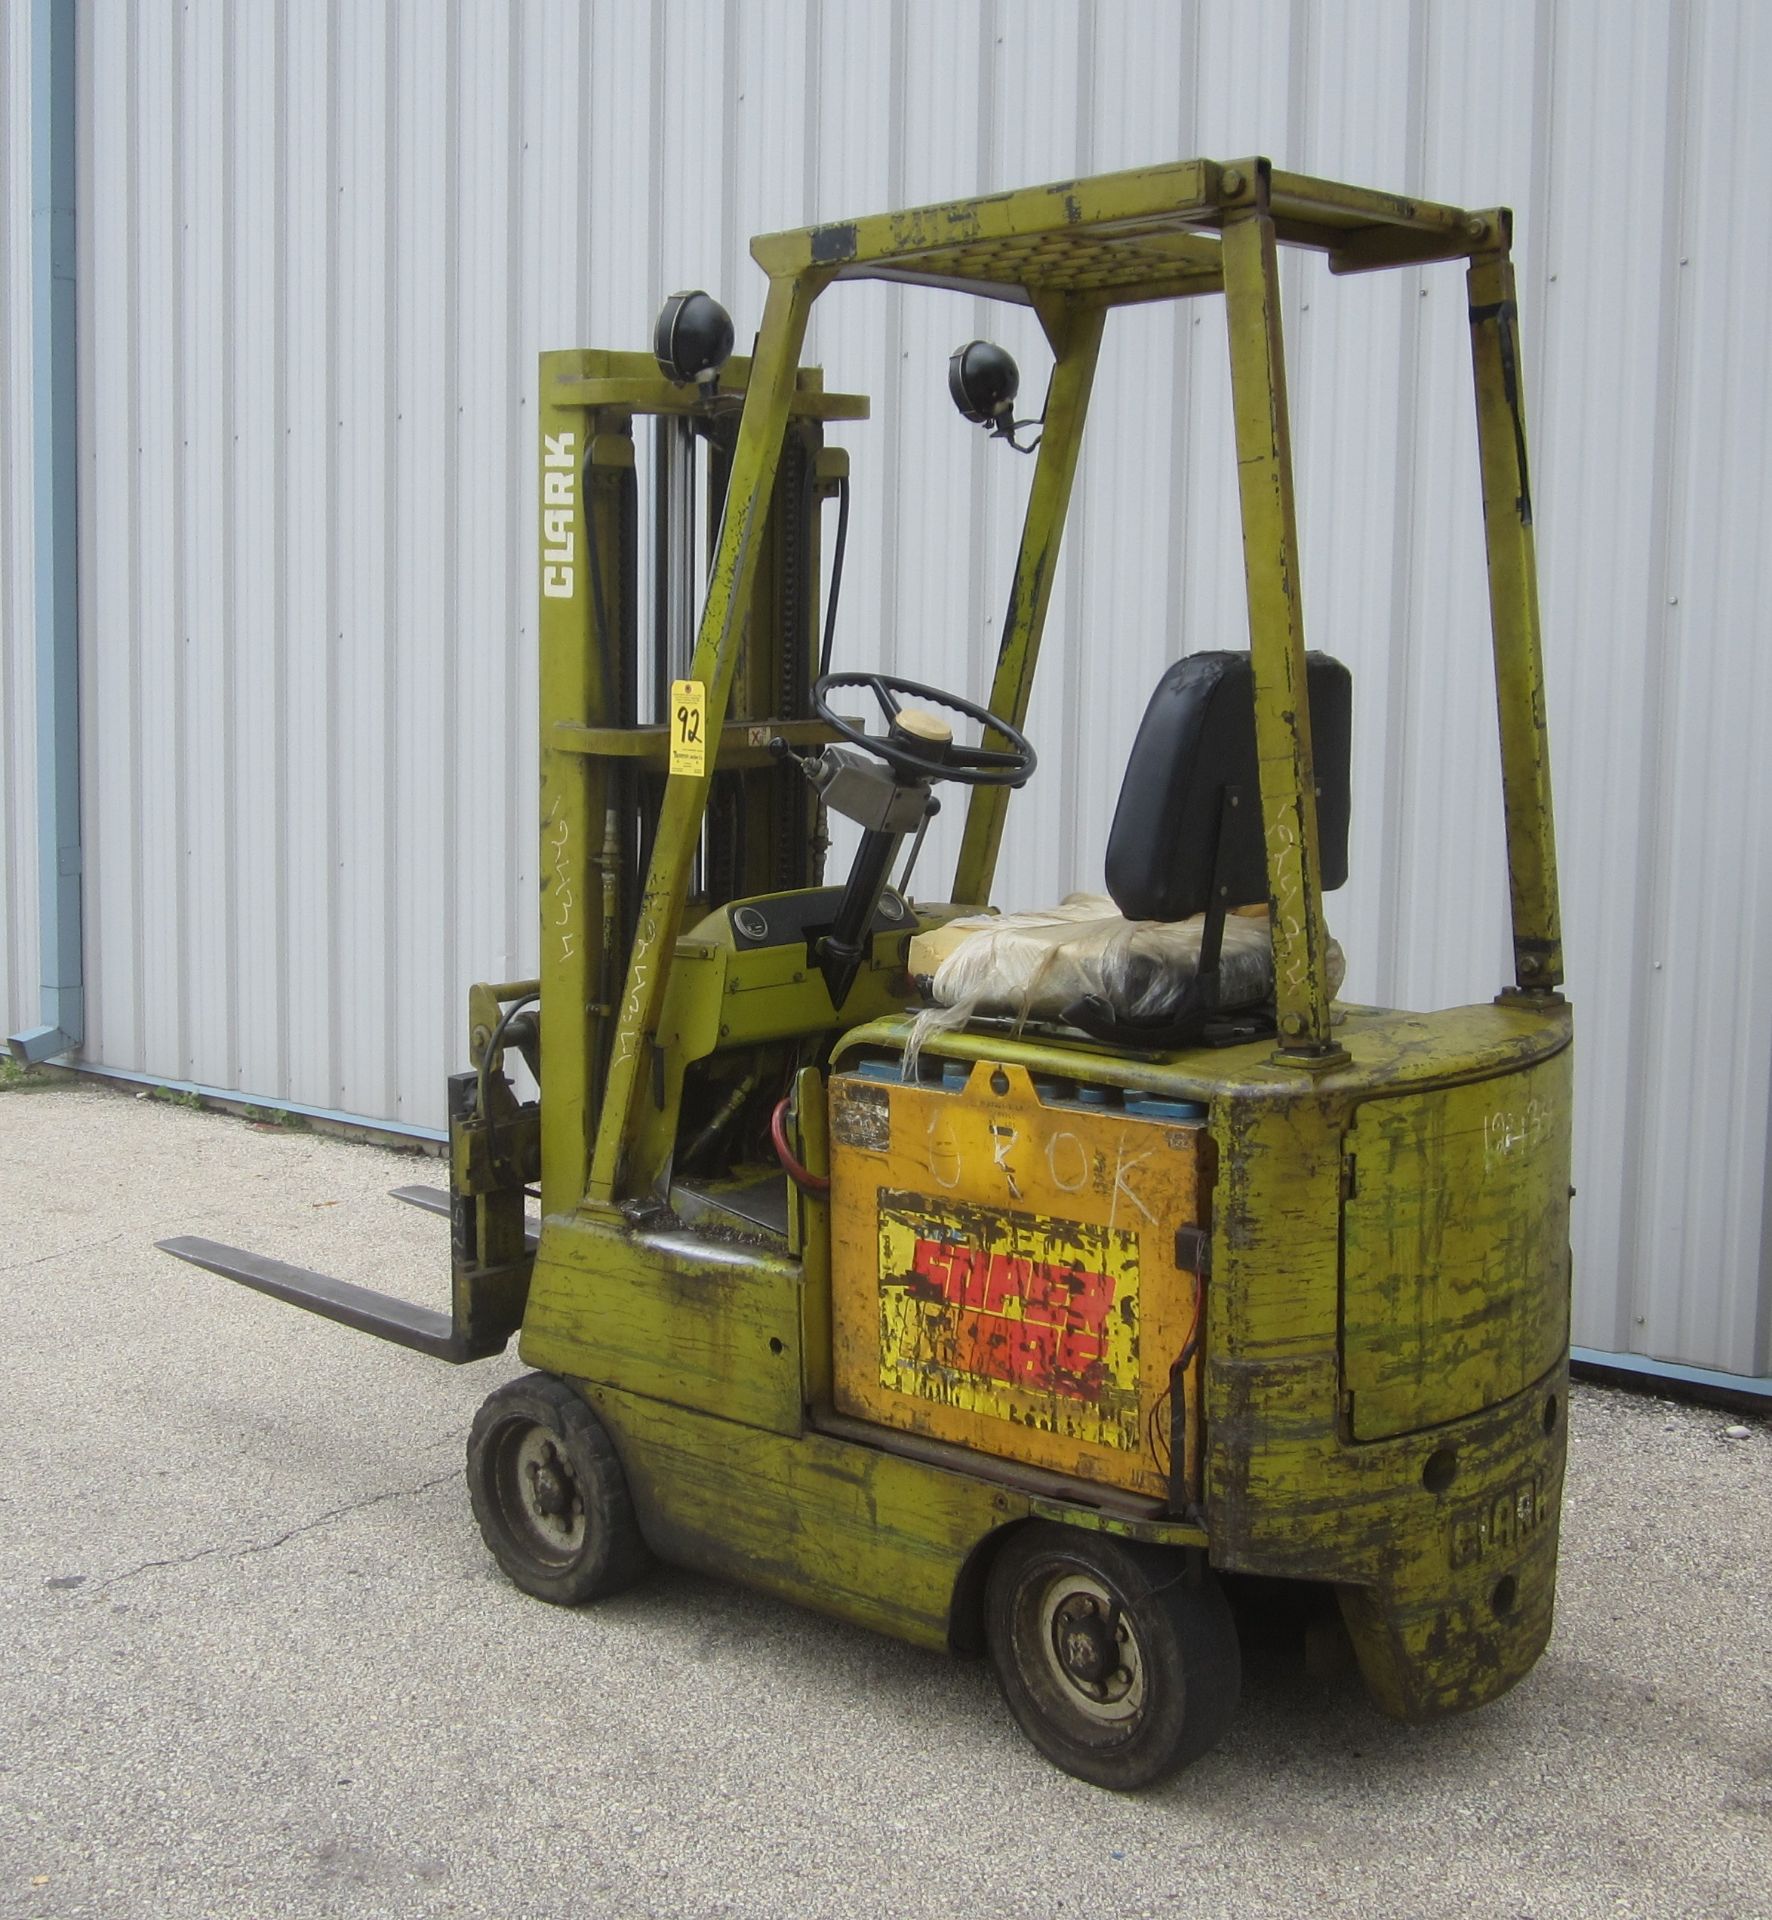 Clark Model EC500-S30 Electric Forklift, s/n E235-0028-5041FA, 2,275 Lb. Capacity, 3-Stage Mast, - Image 4 of 4